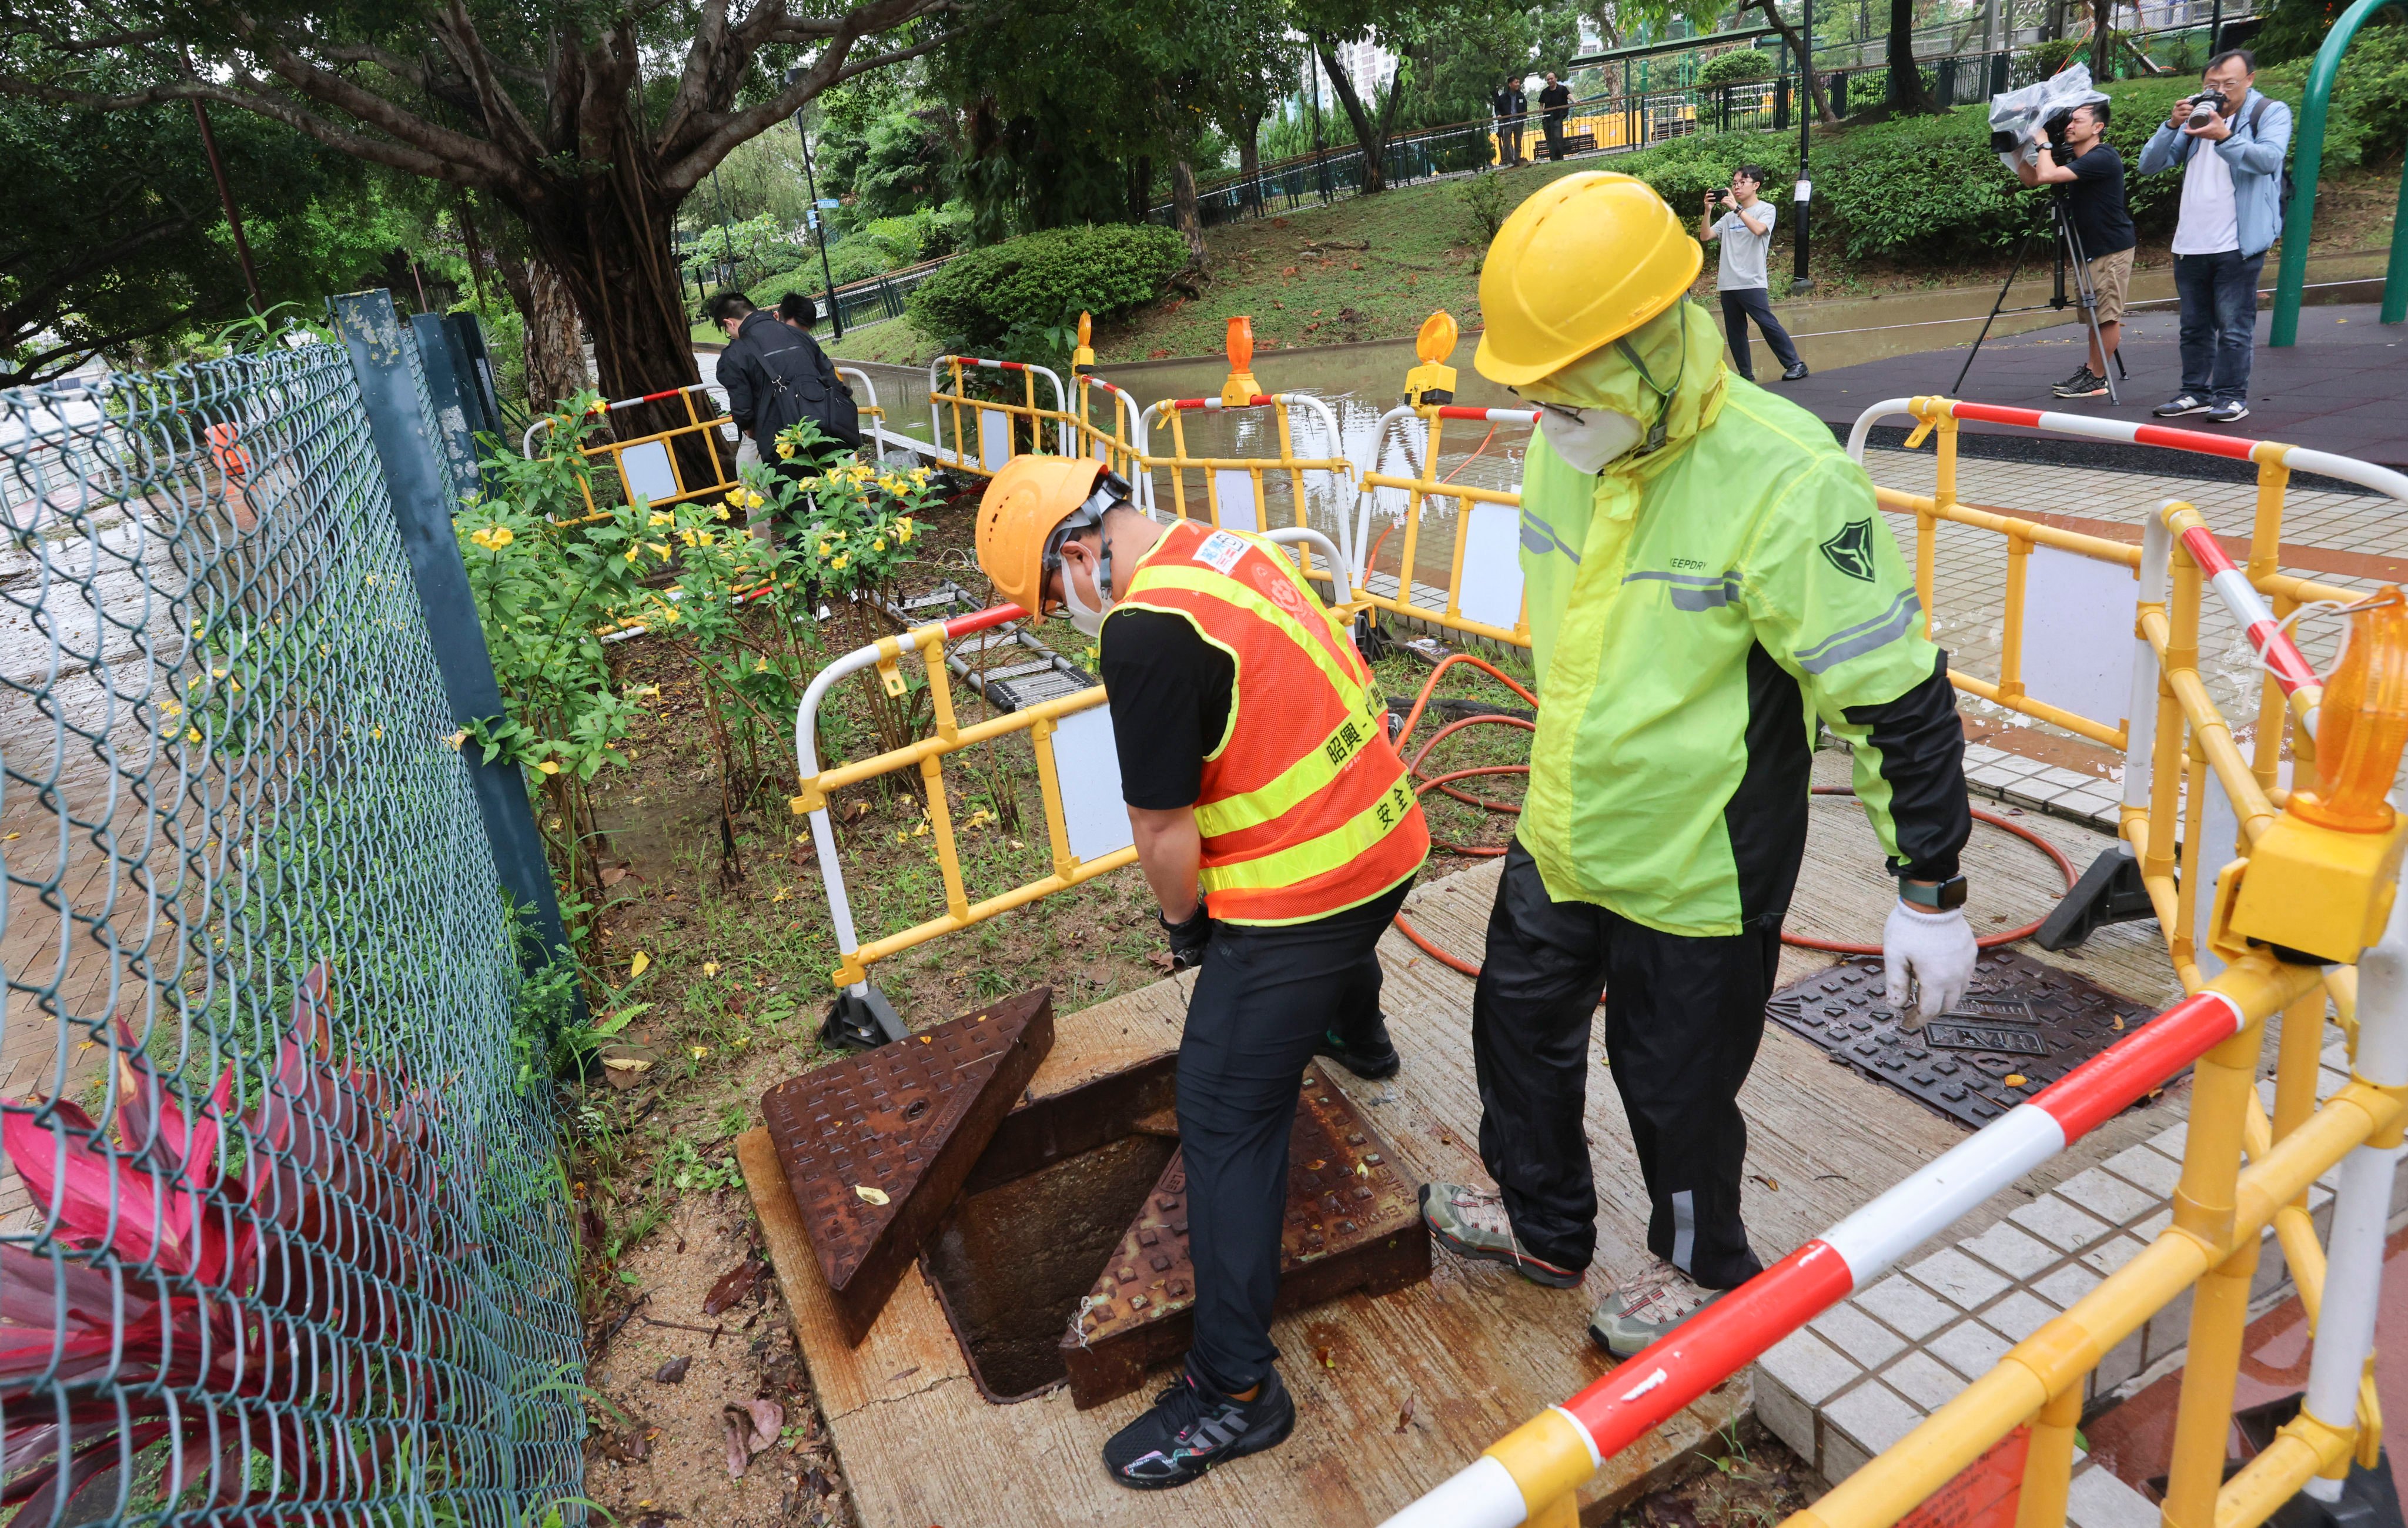 Two victims are suspected to have inhaled toxic gas in the manhole they were working in. Photo: Jelly Tse